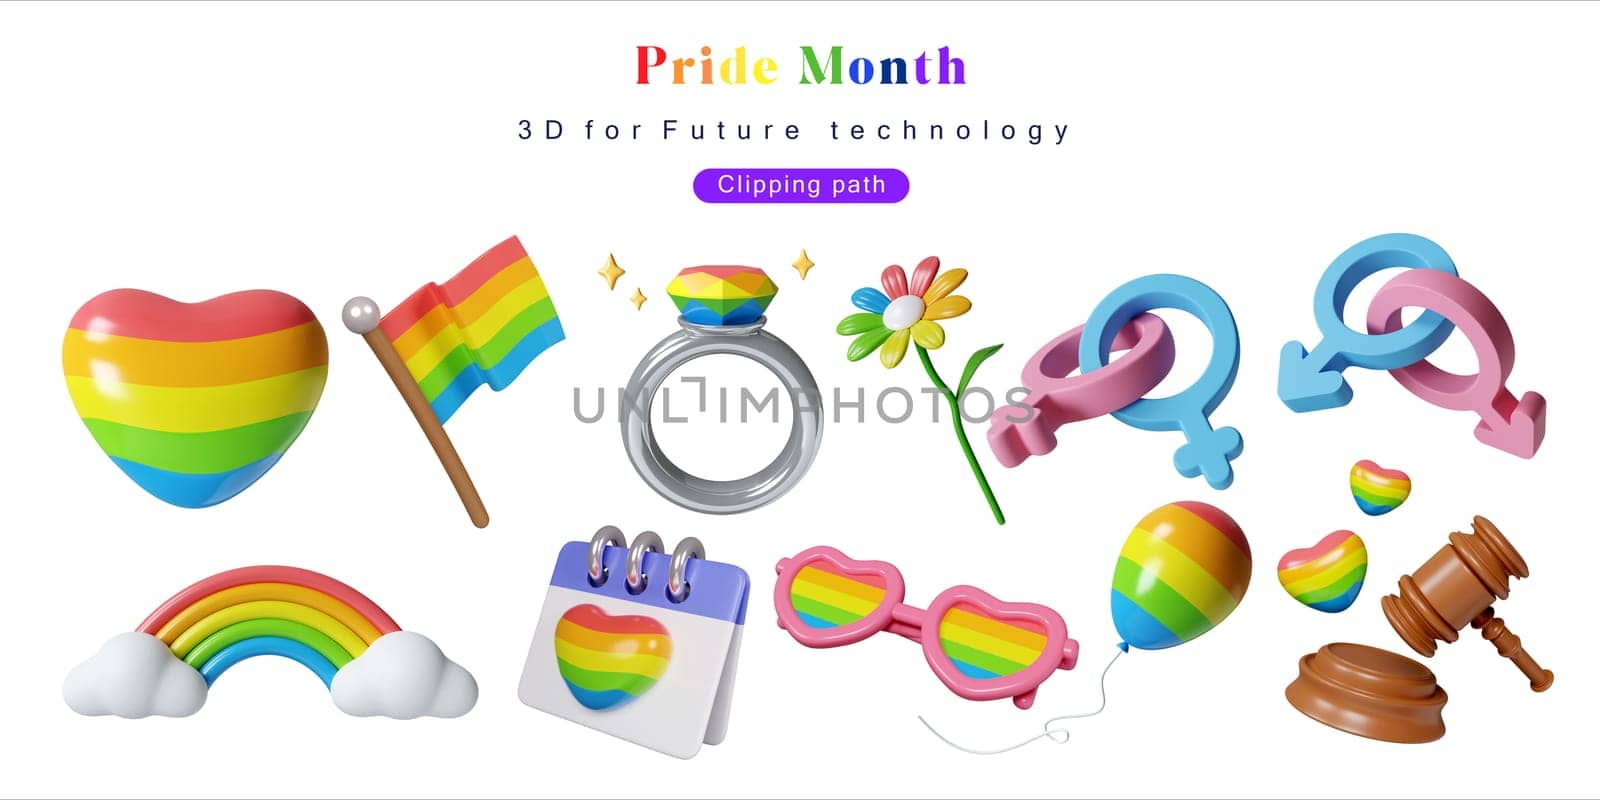 Pride day 3D icon set. rainbow, sunglasses, ring, balloon, heart shaped hand 3d rendering illustration.